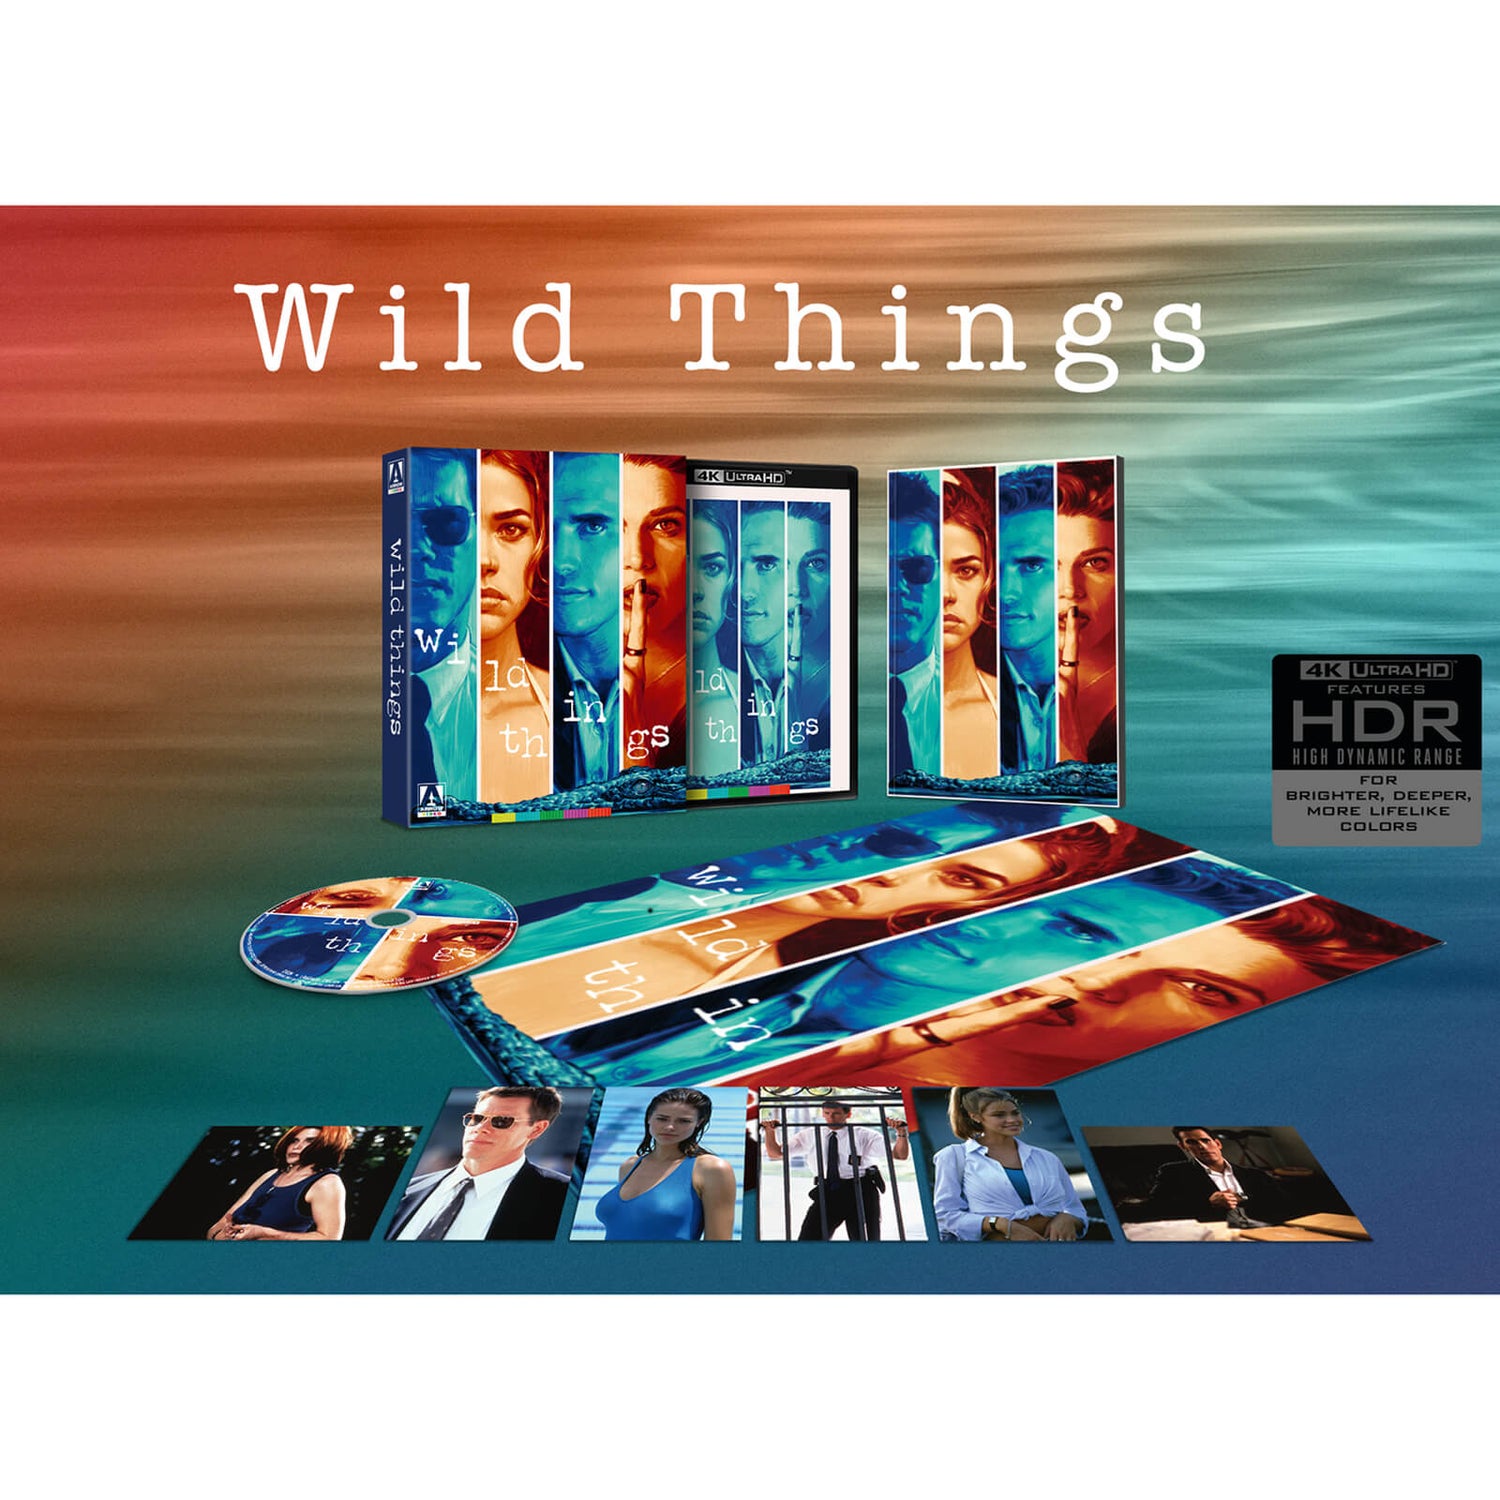 Wild Things Limited Edition 4K UHD